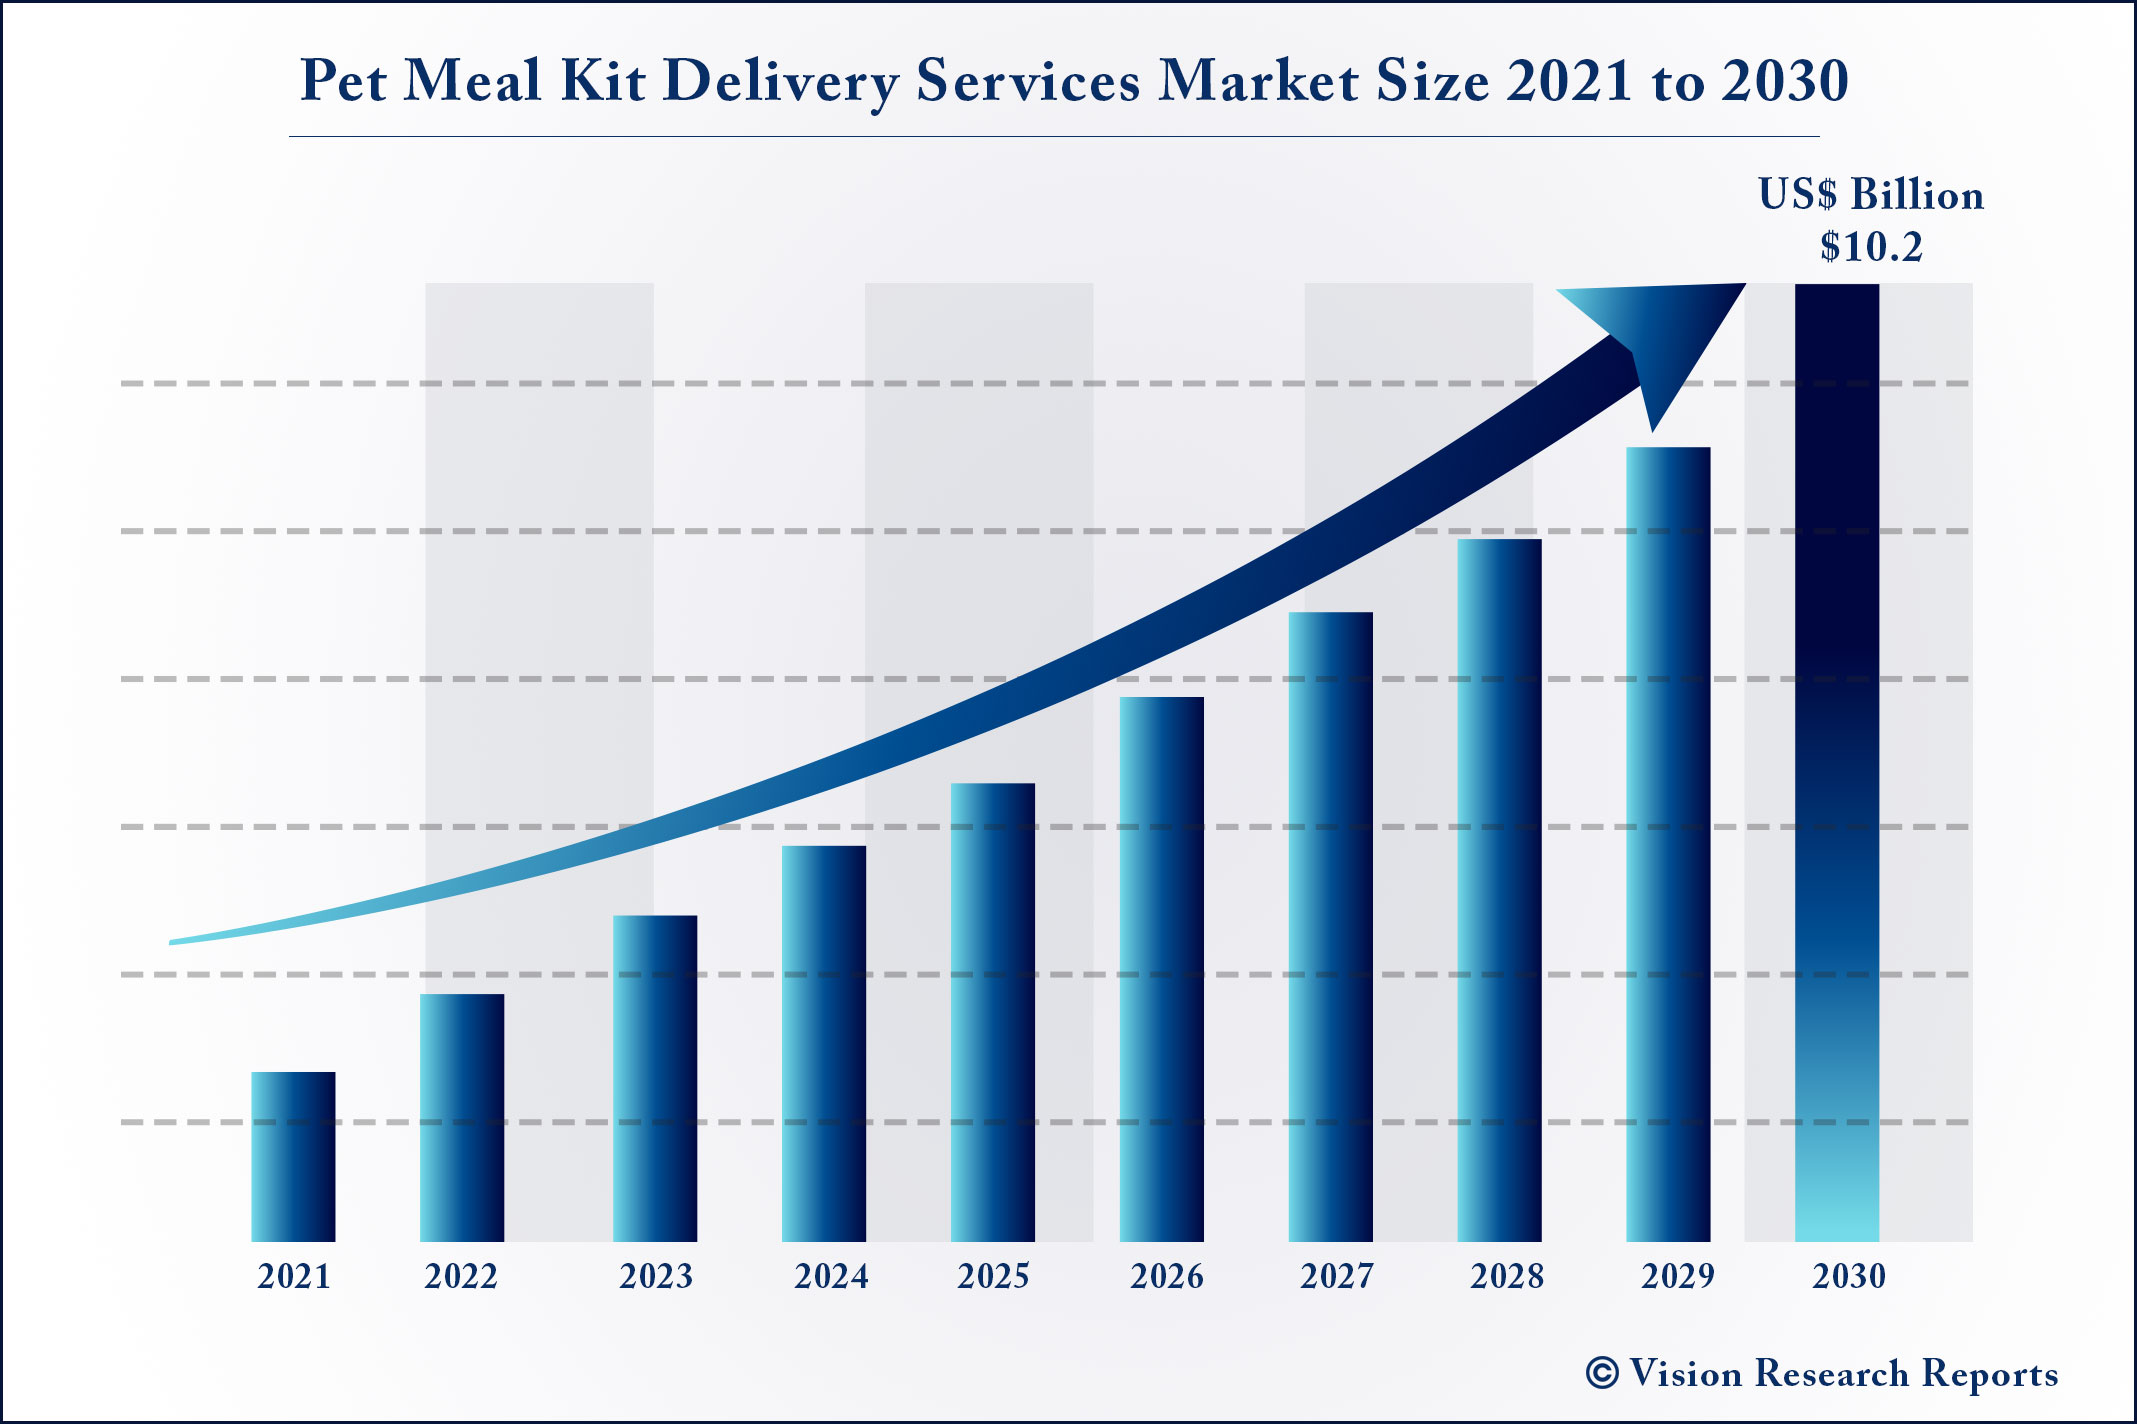 Pet Meal Kit Delivery Services Market Size 2021 to 2030